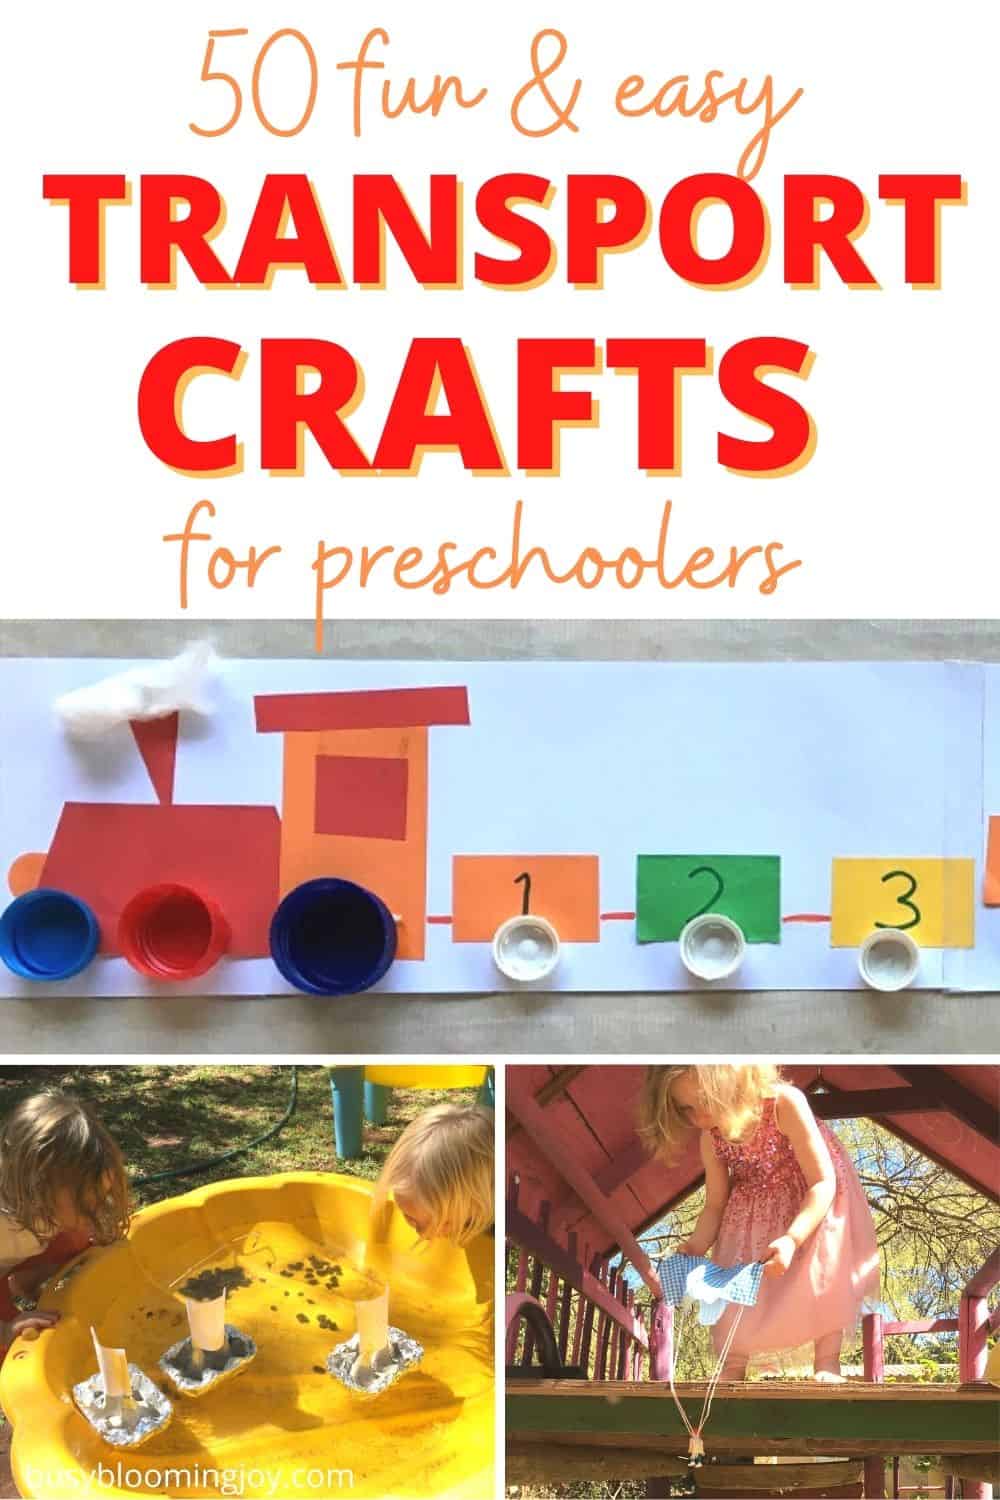 50 Fun Transportation Crafts & Activities for Toddlers and Preschoolers